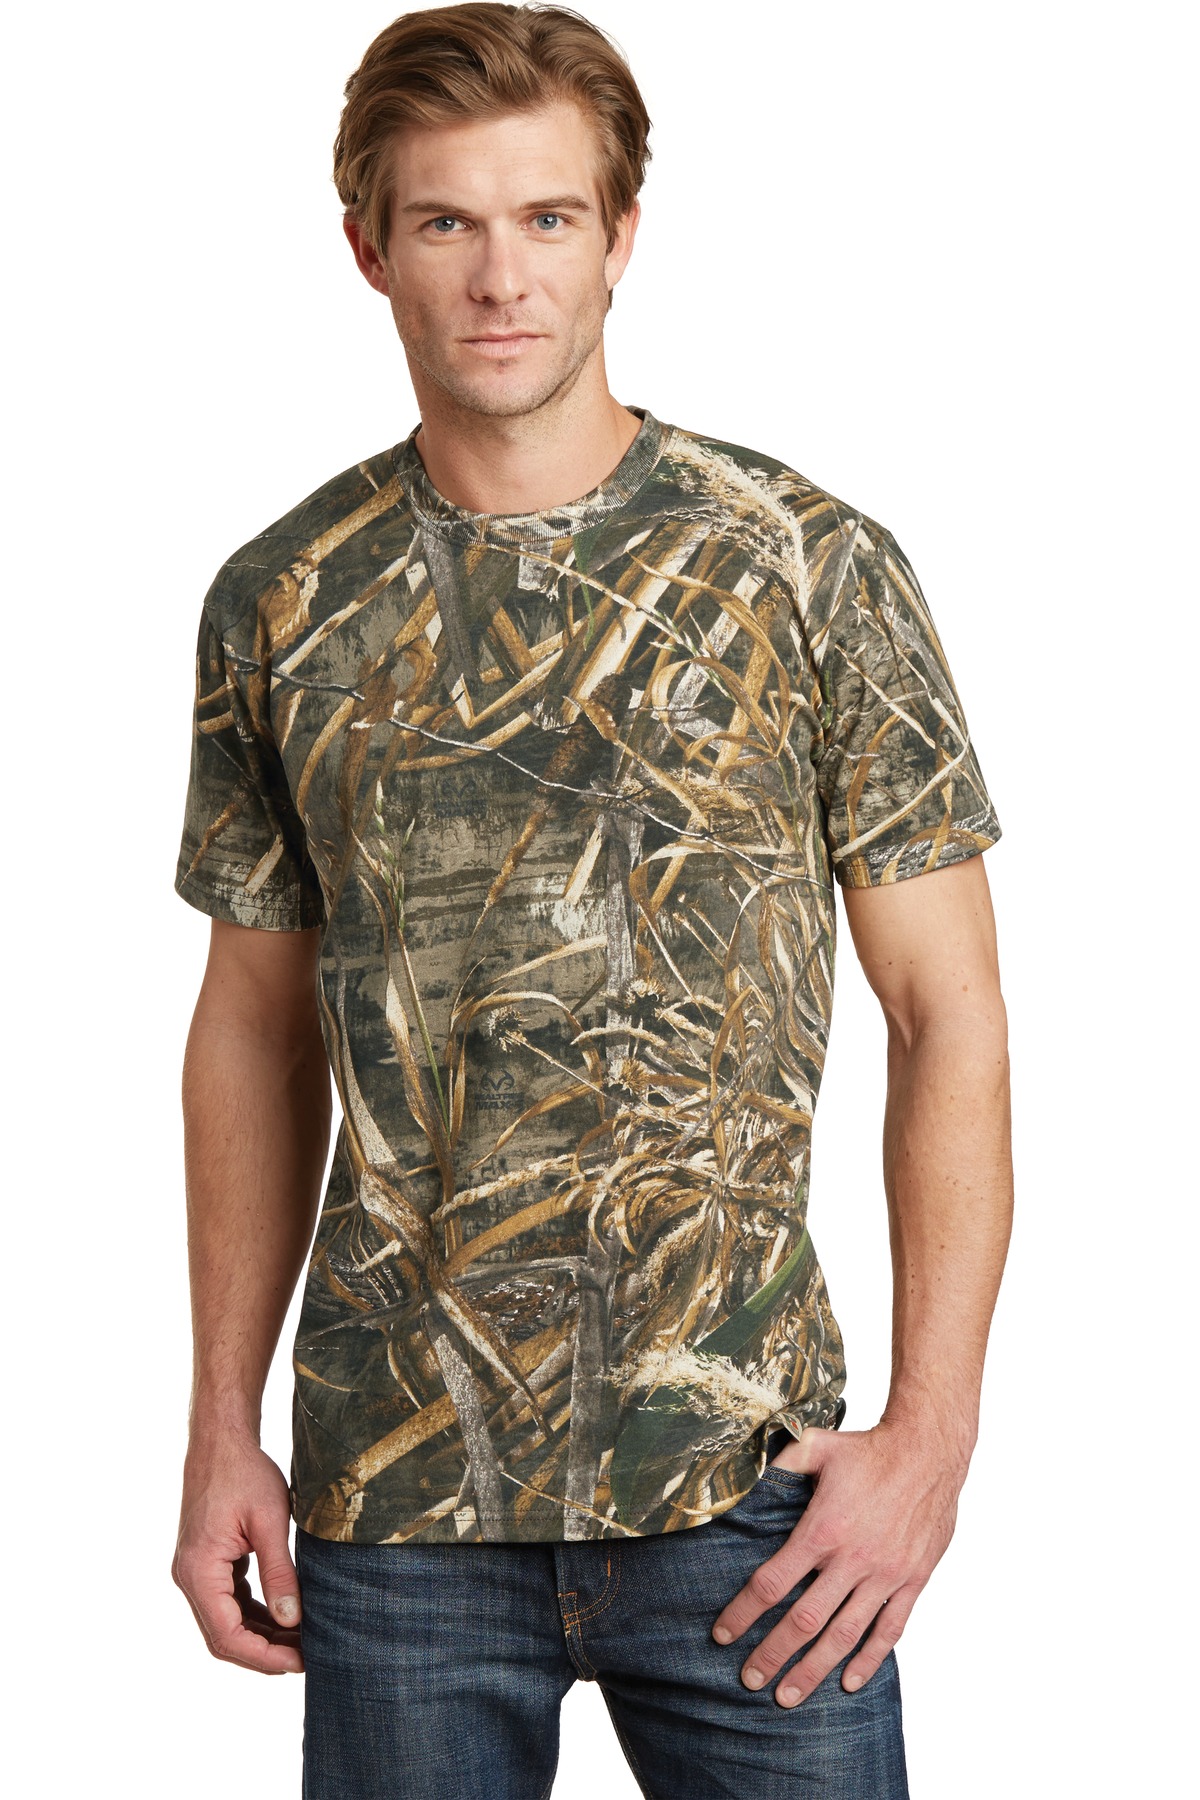 Russell Outdoors - Realtree Explorer 100% Cotton T-Shirt....